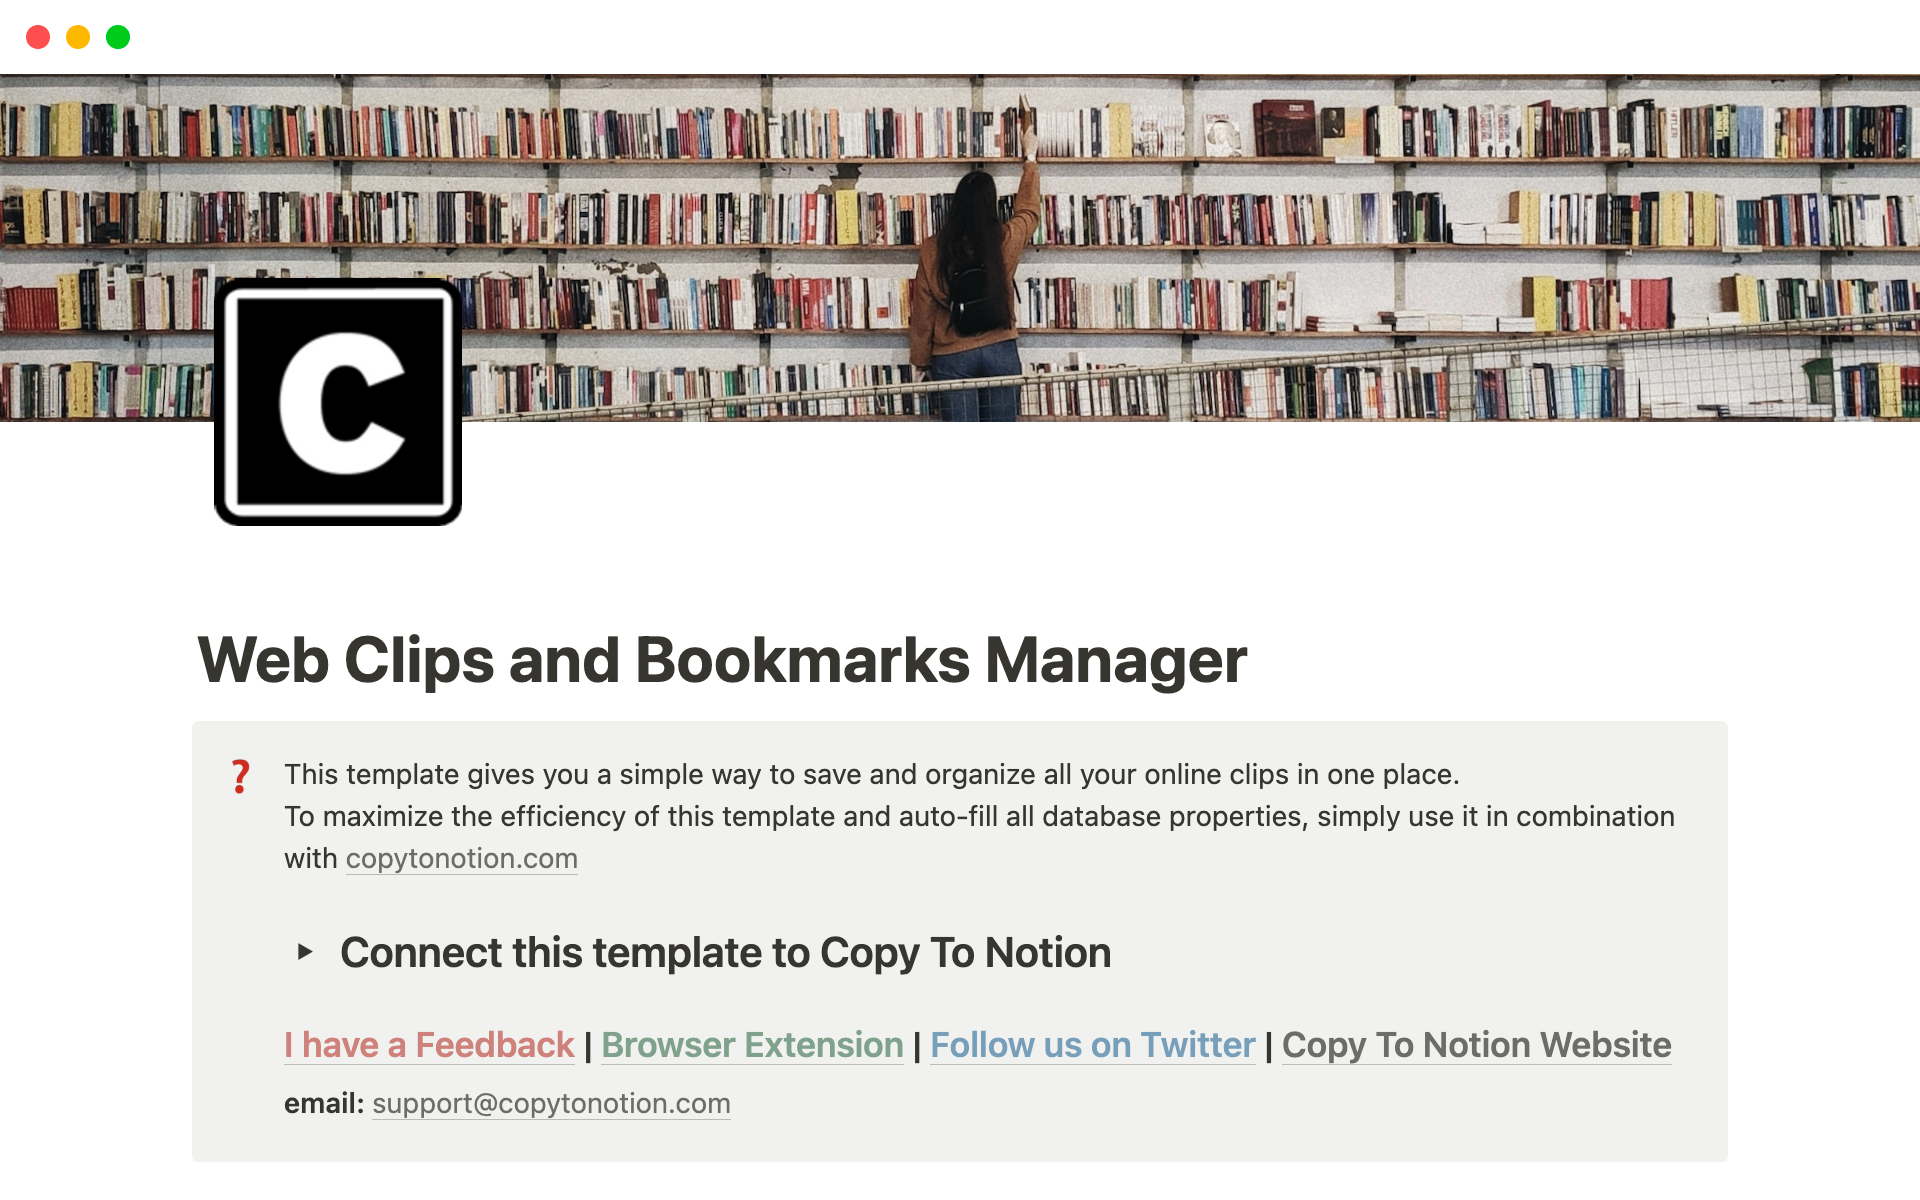 This template gives you a simple way to save and organize all your online clips and bookmarks in one place.